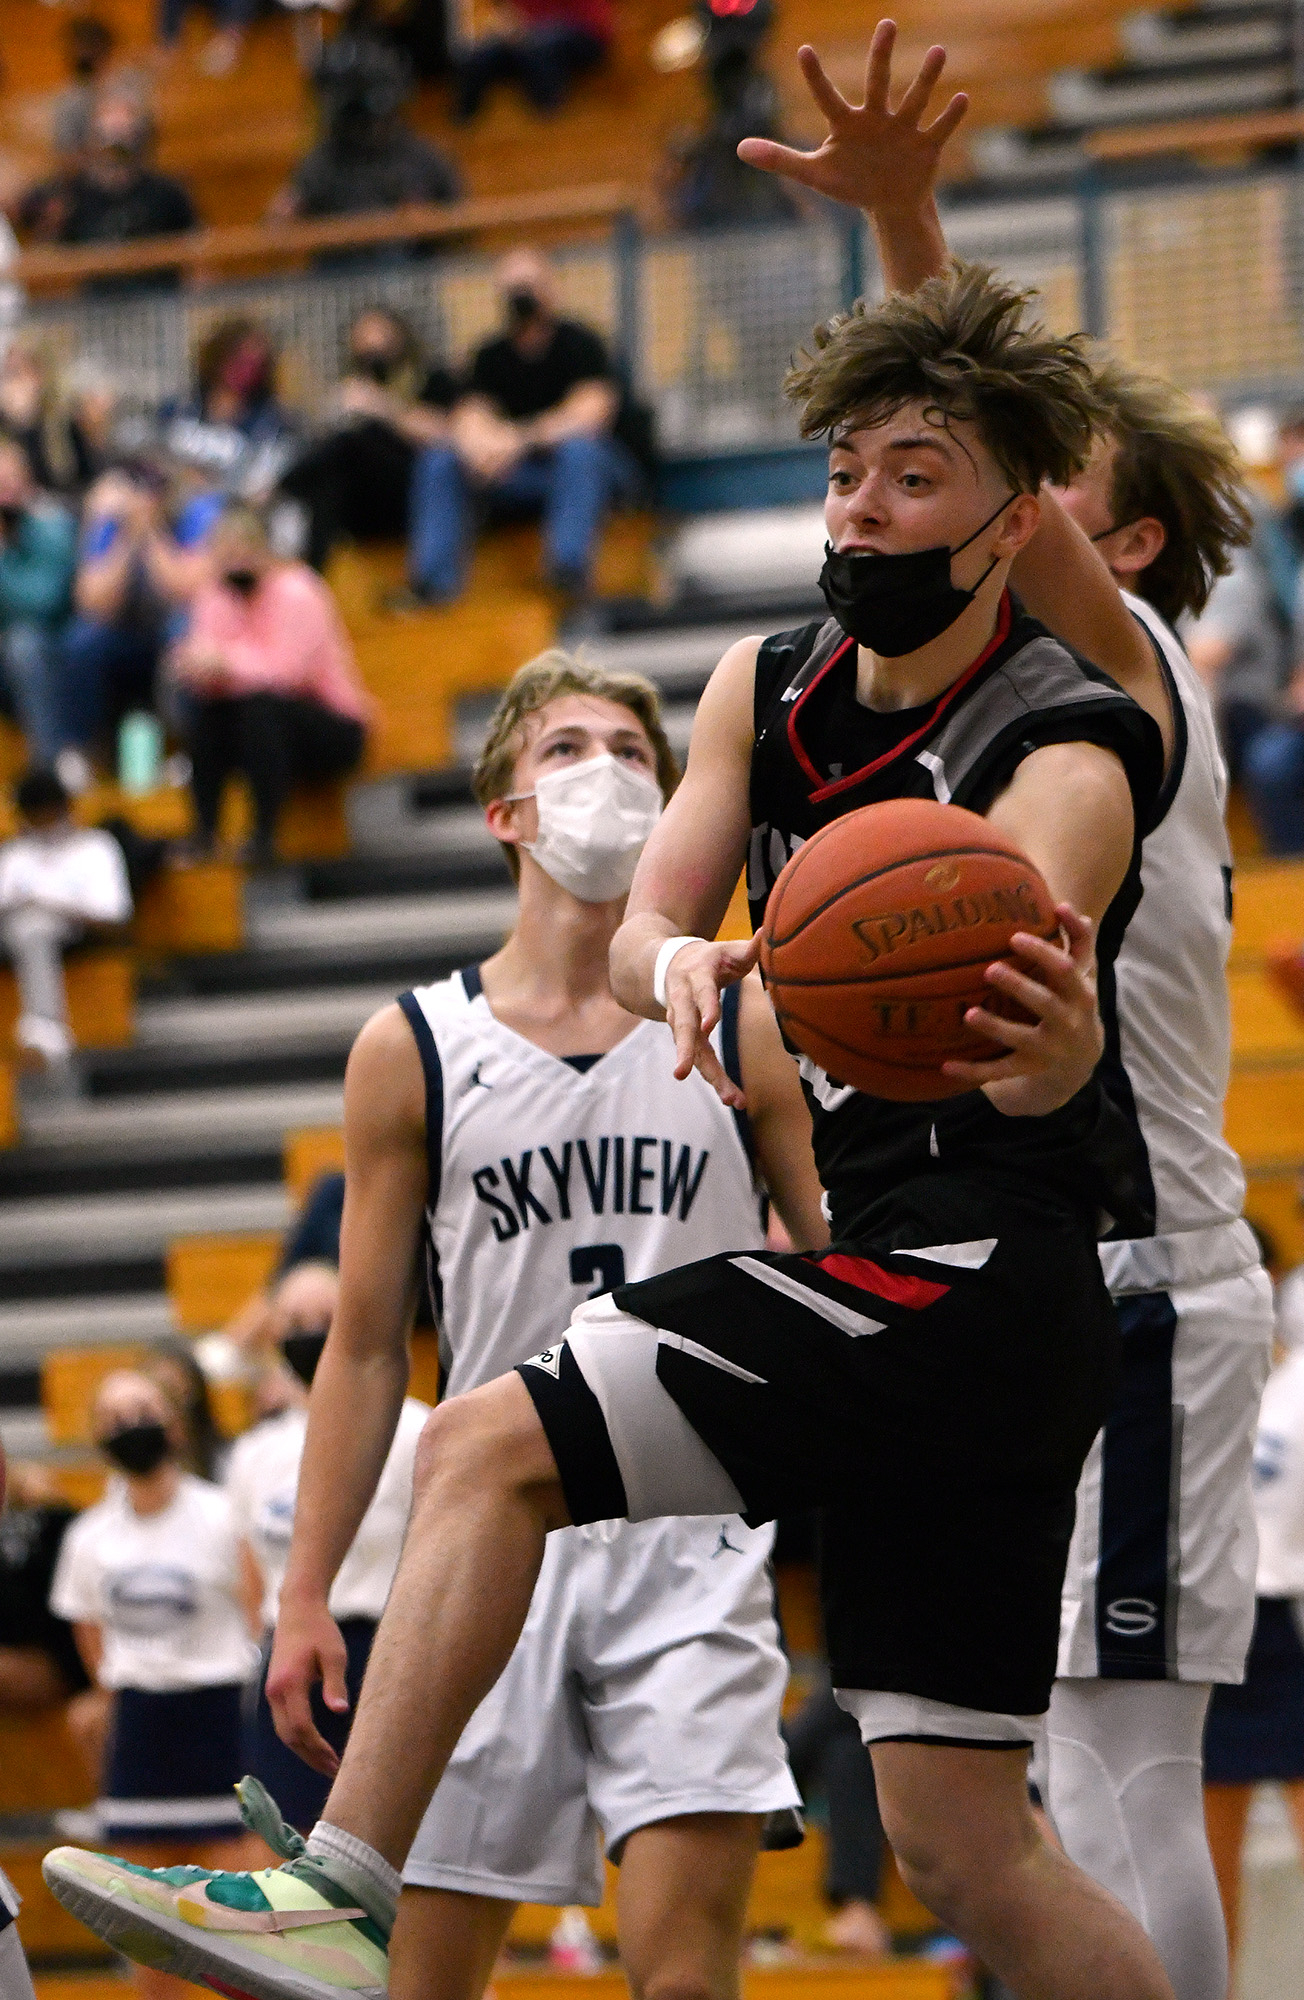 Union High School senior Kaden Horn passes the basketball Tuesday, April 27, 2021, during the TitanÕs 79-71 win against Skyview High School at Skyview.